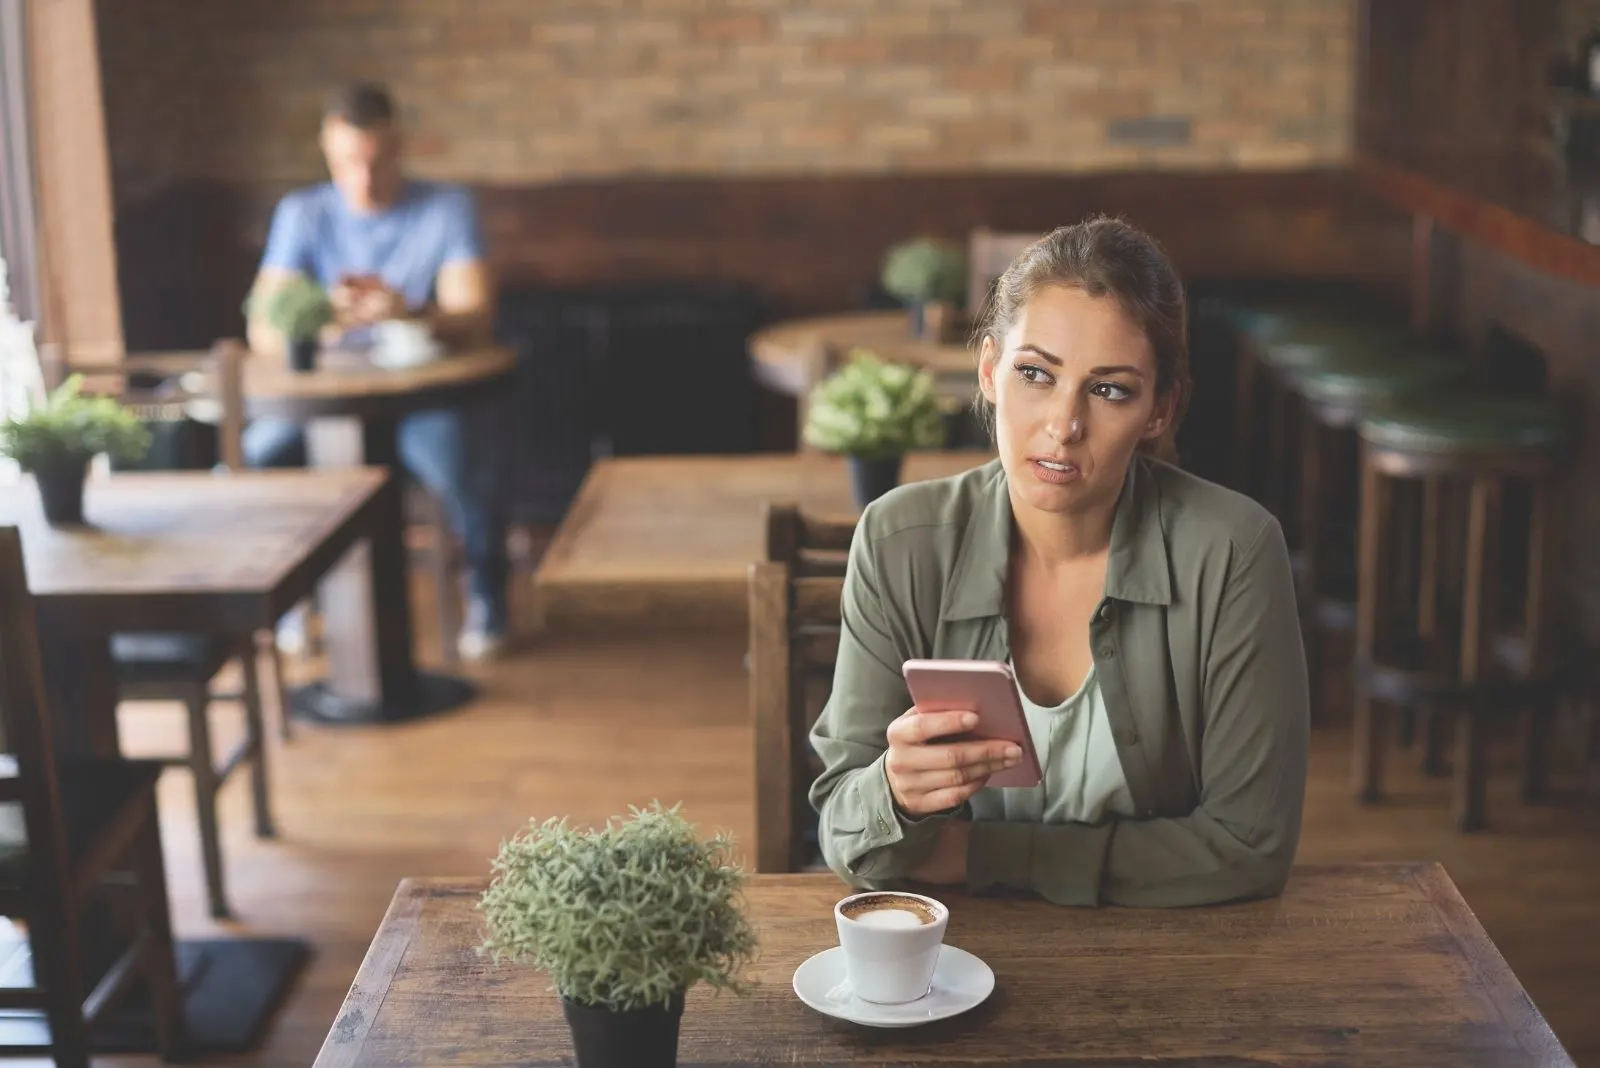 pensive woman text messaging insde cafe with a blurred guy having coffee at the back